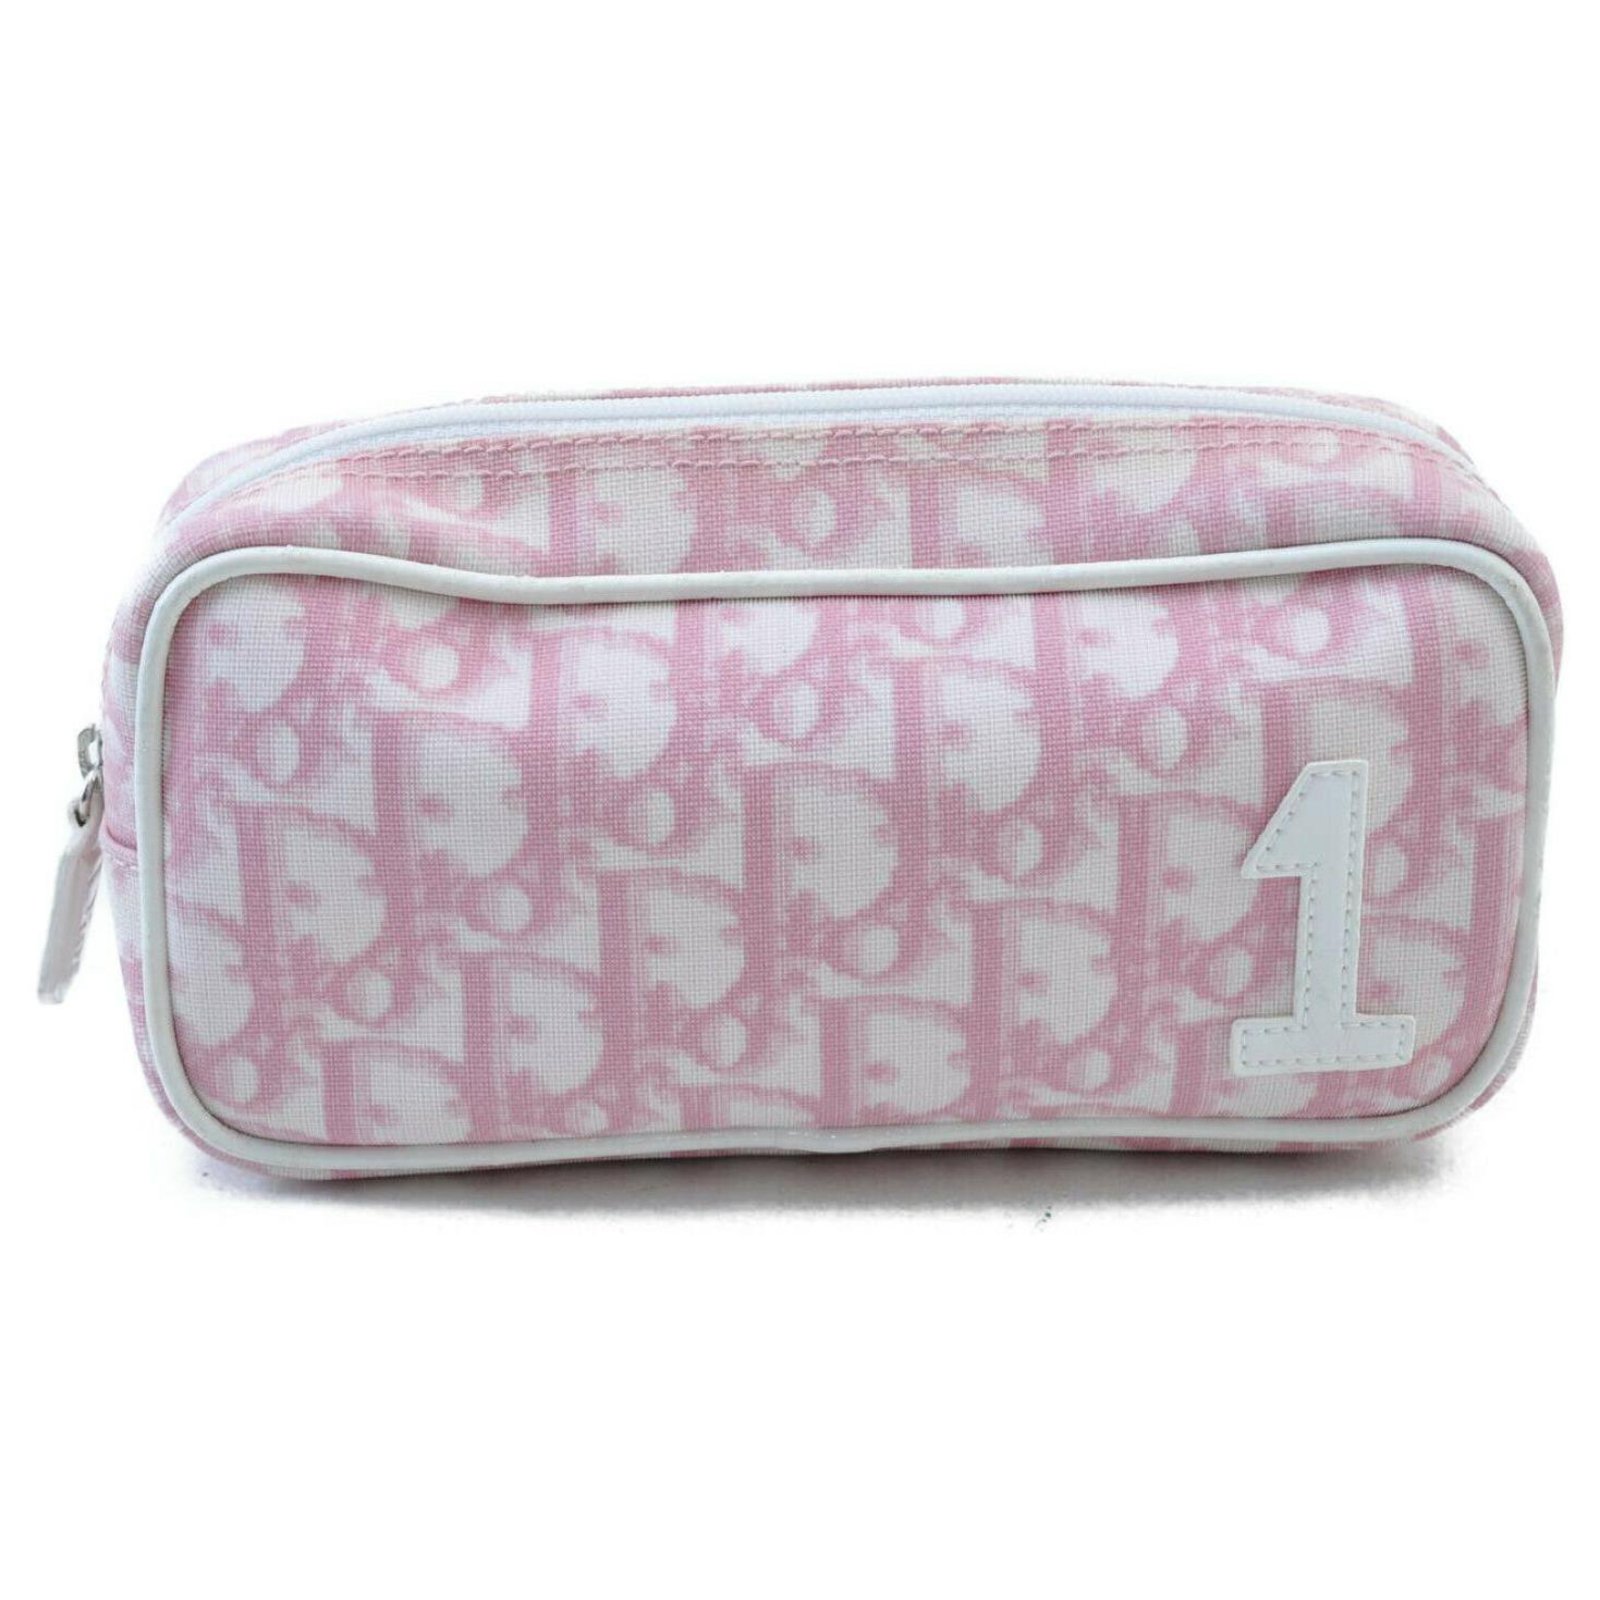 Dior, Bags, Dior Toiletry Bag Purse Pouch Cosmetic Bag To Crossbody Bag